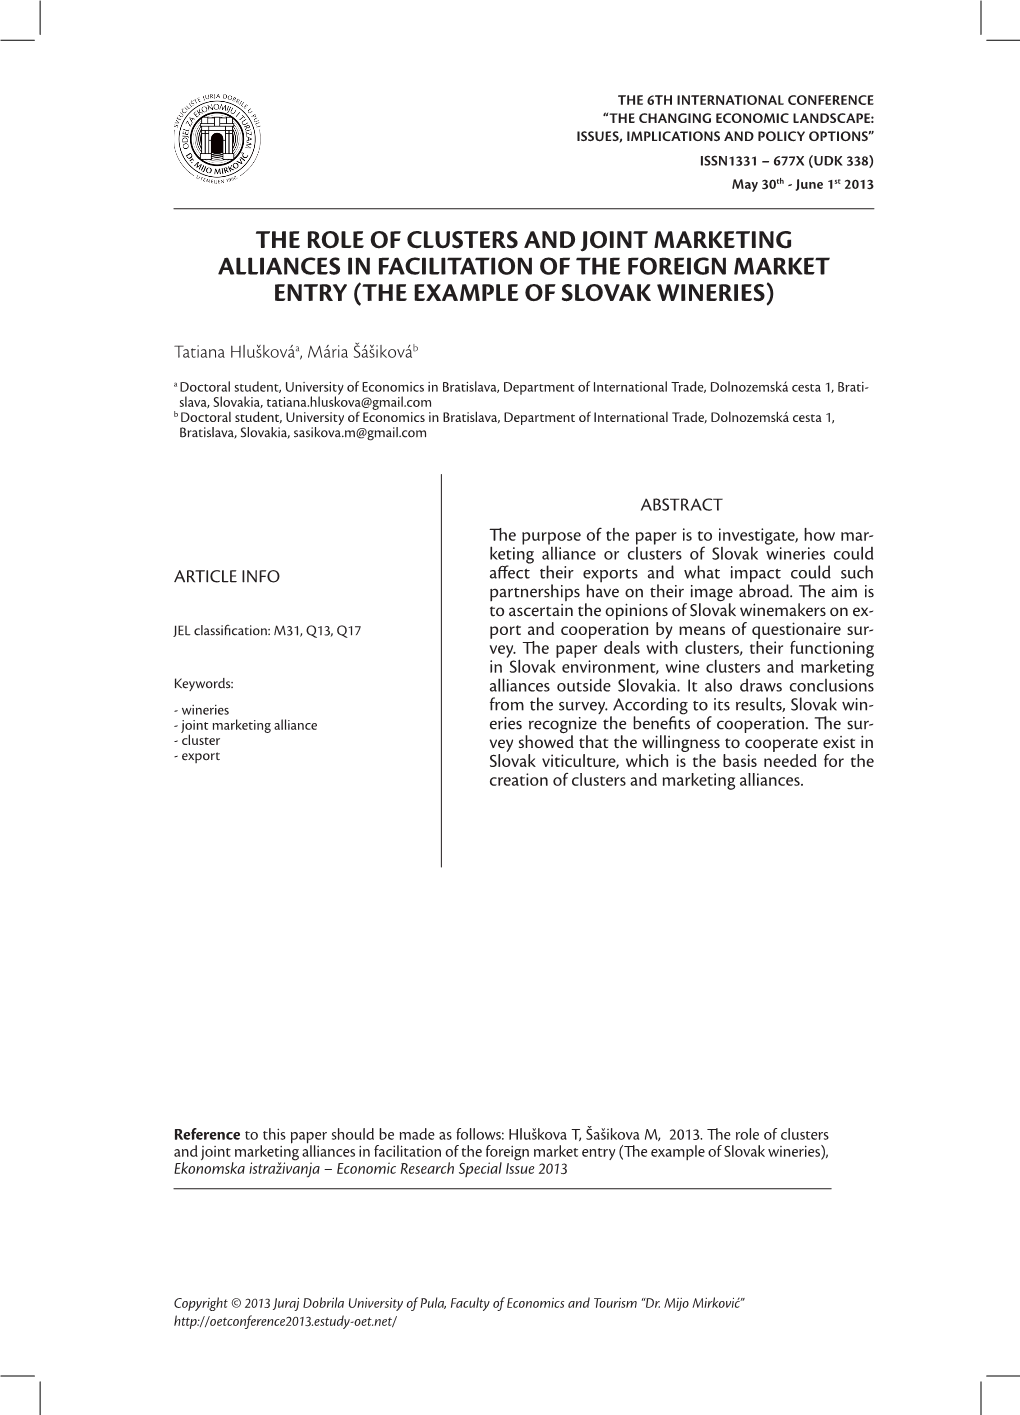 The Role of Clusters and Joint Marketing Alliances in Facilitation of the Foreign Market Entry (The Example of Slovak Wineries)